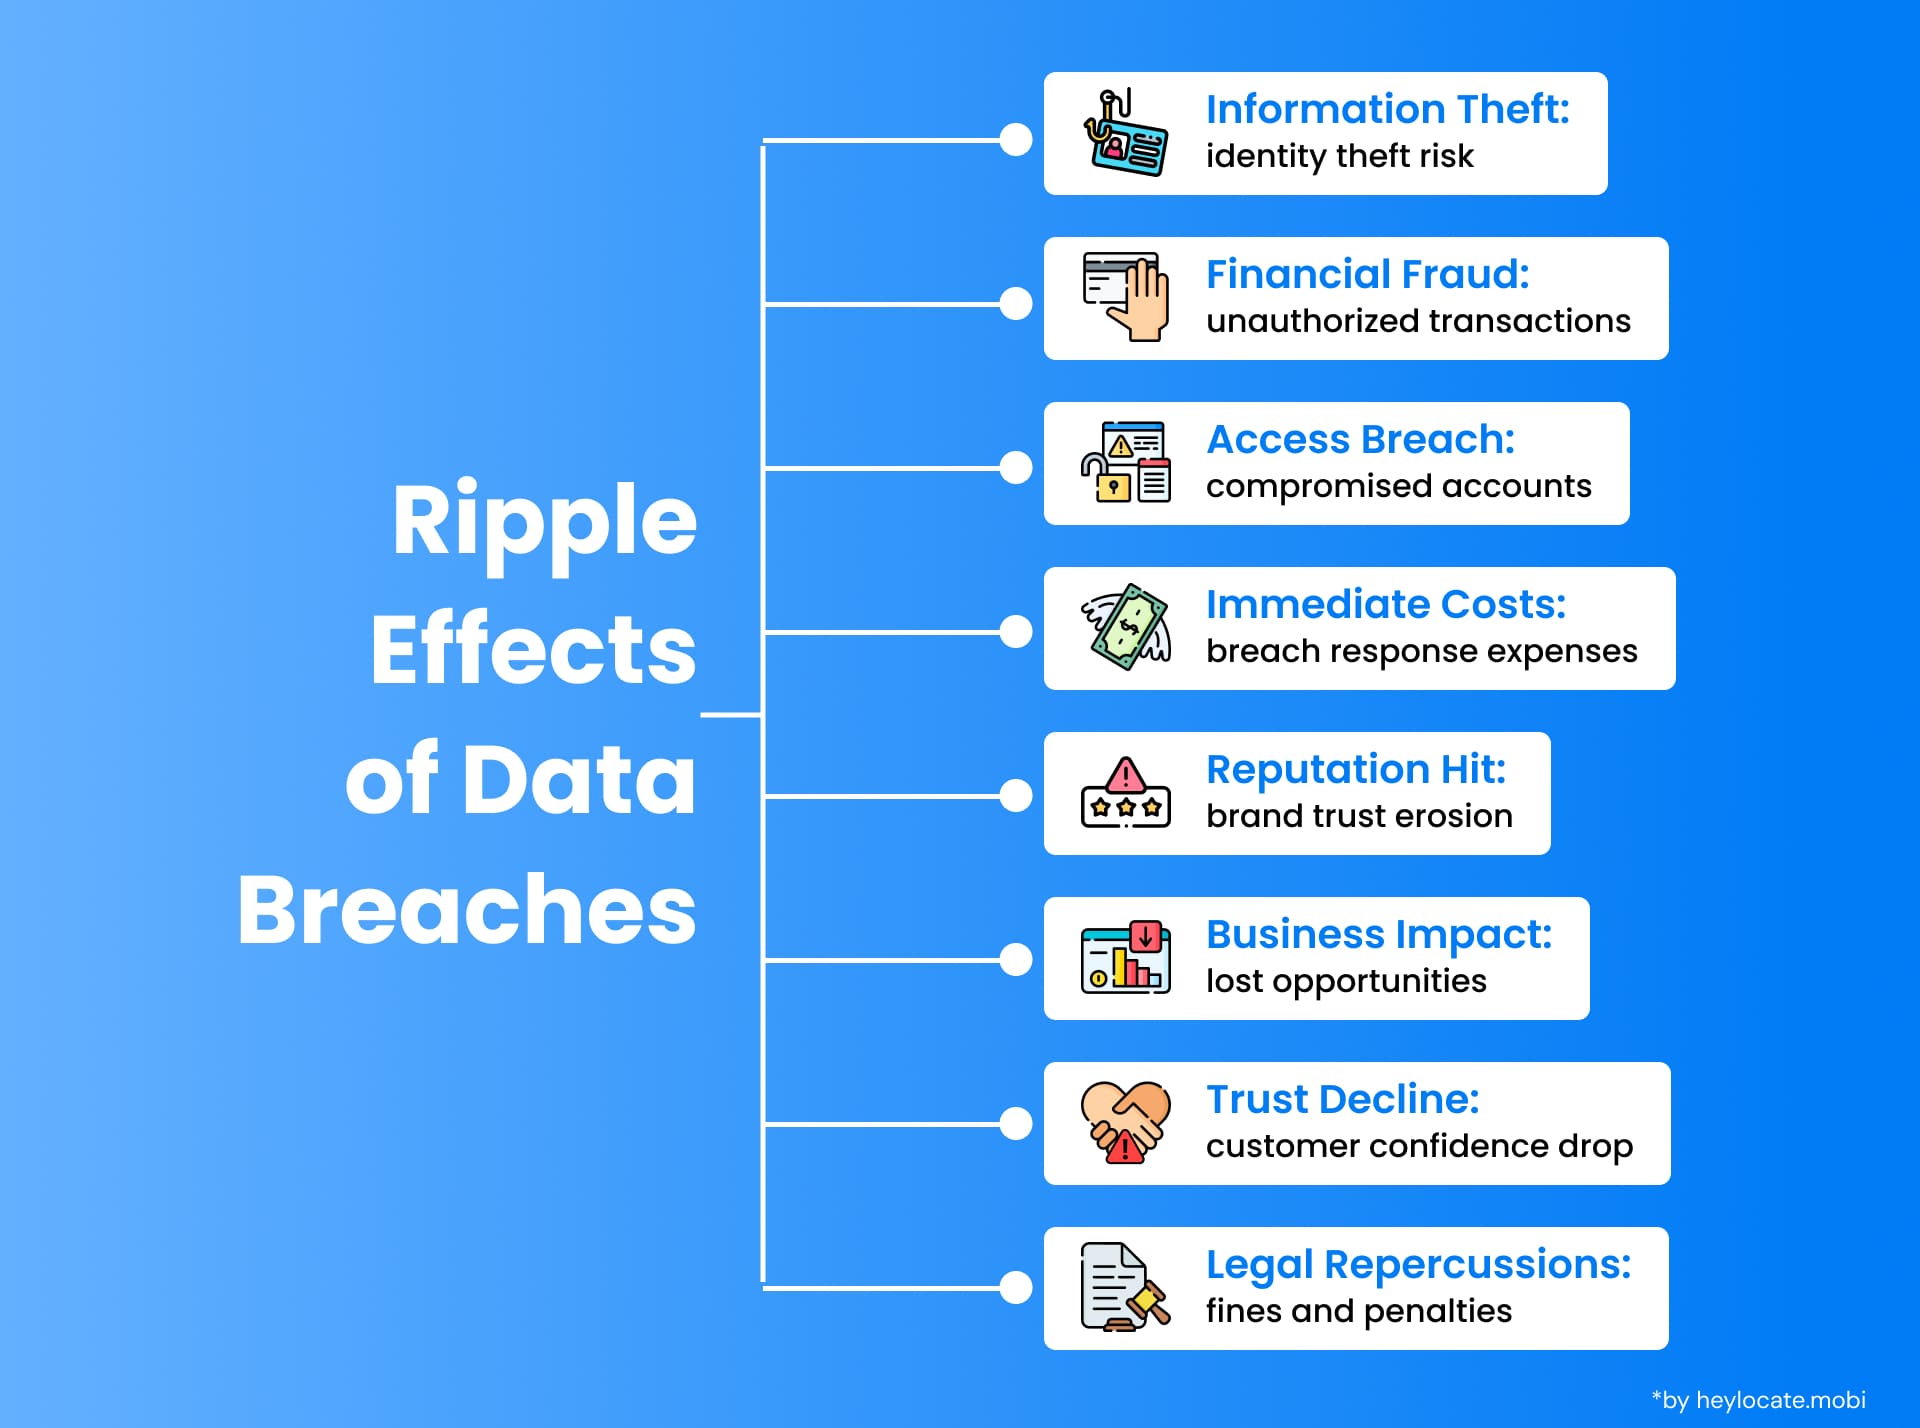 An illustration detailing the consequences of a data breach